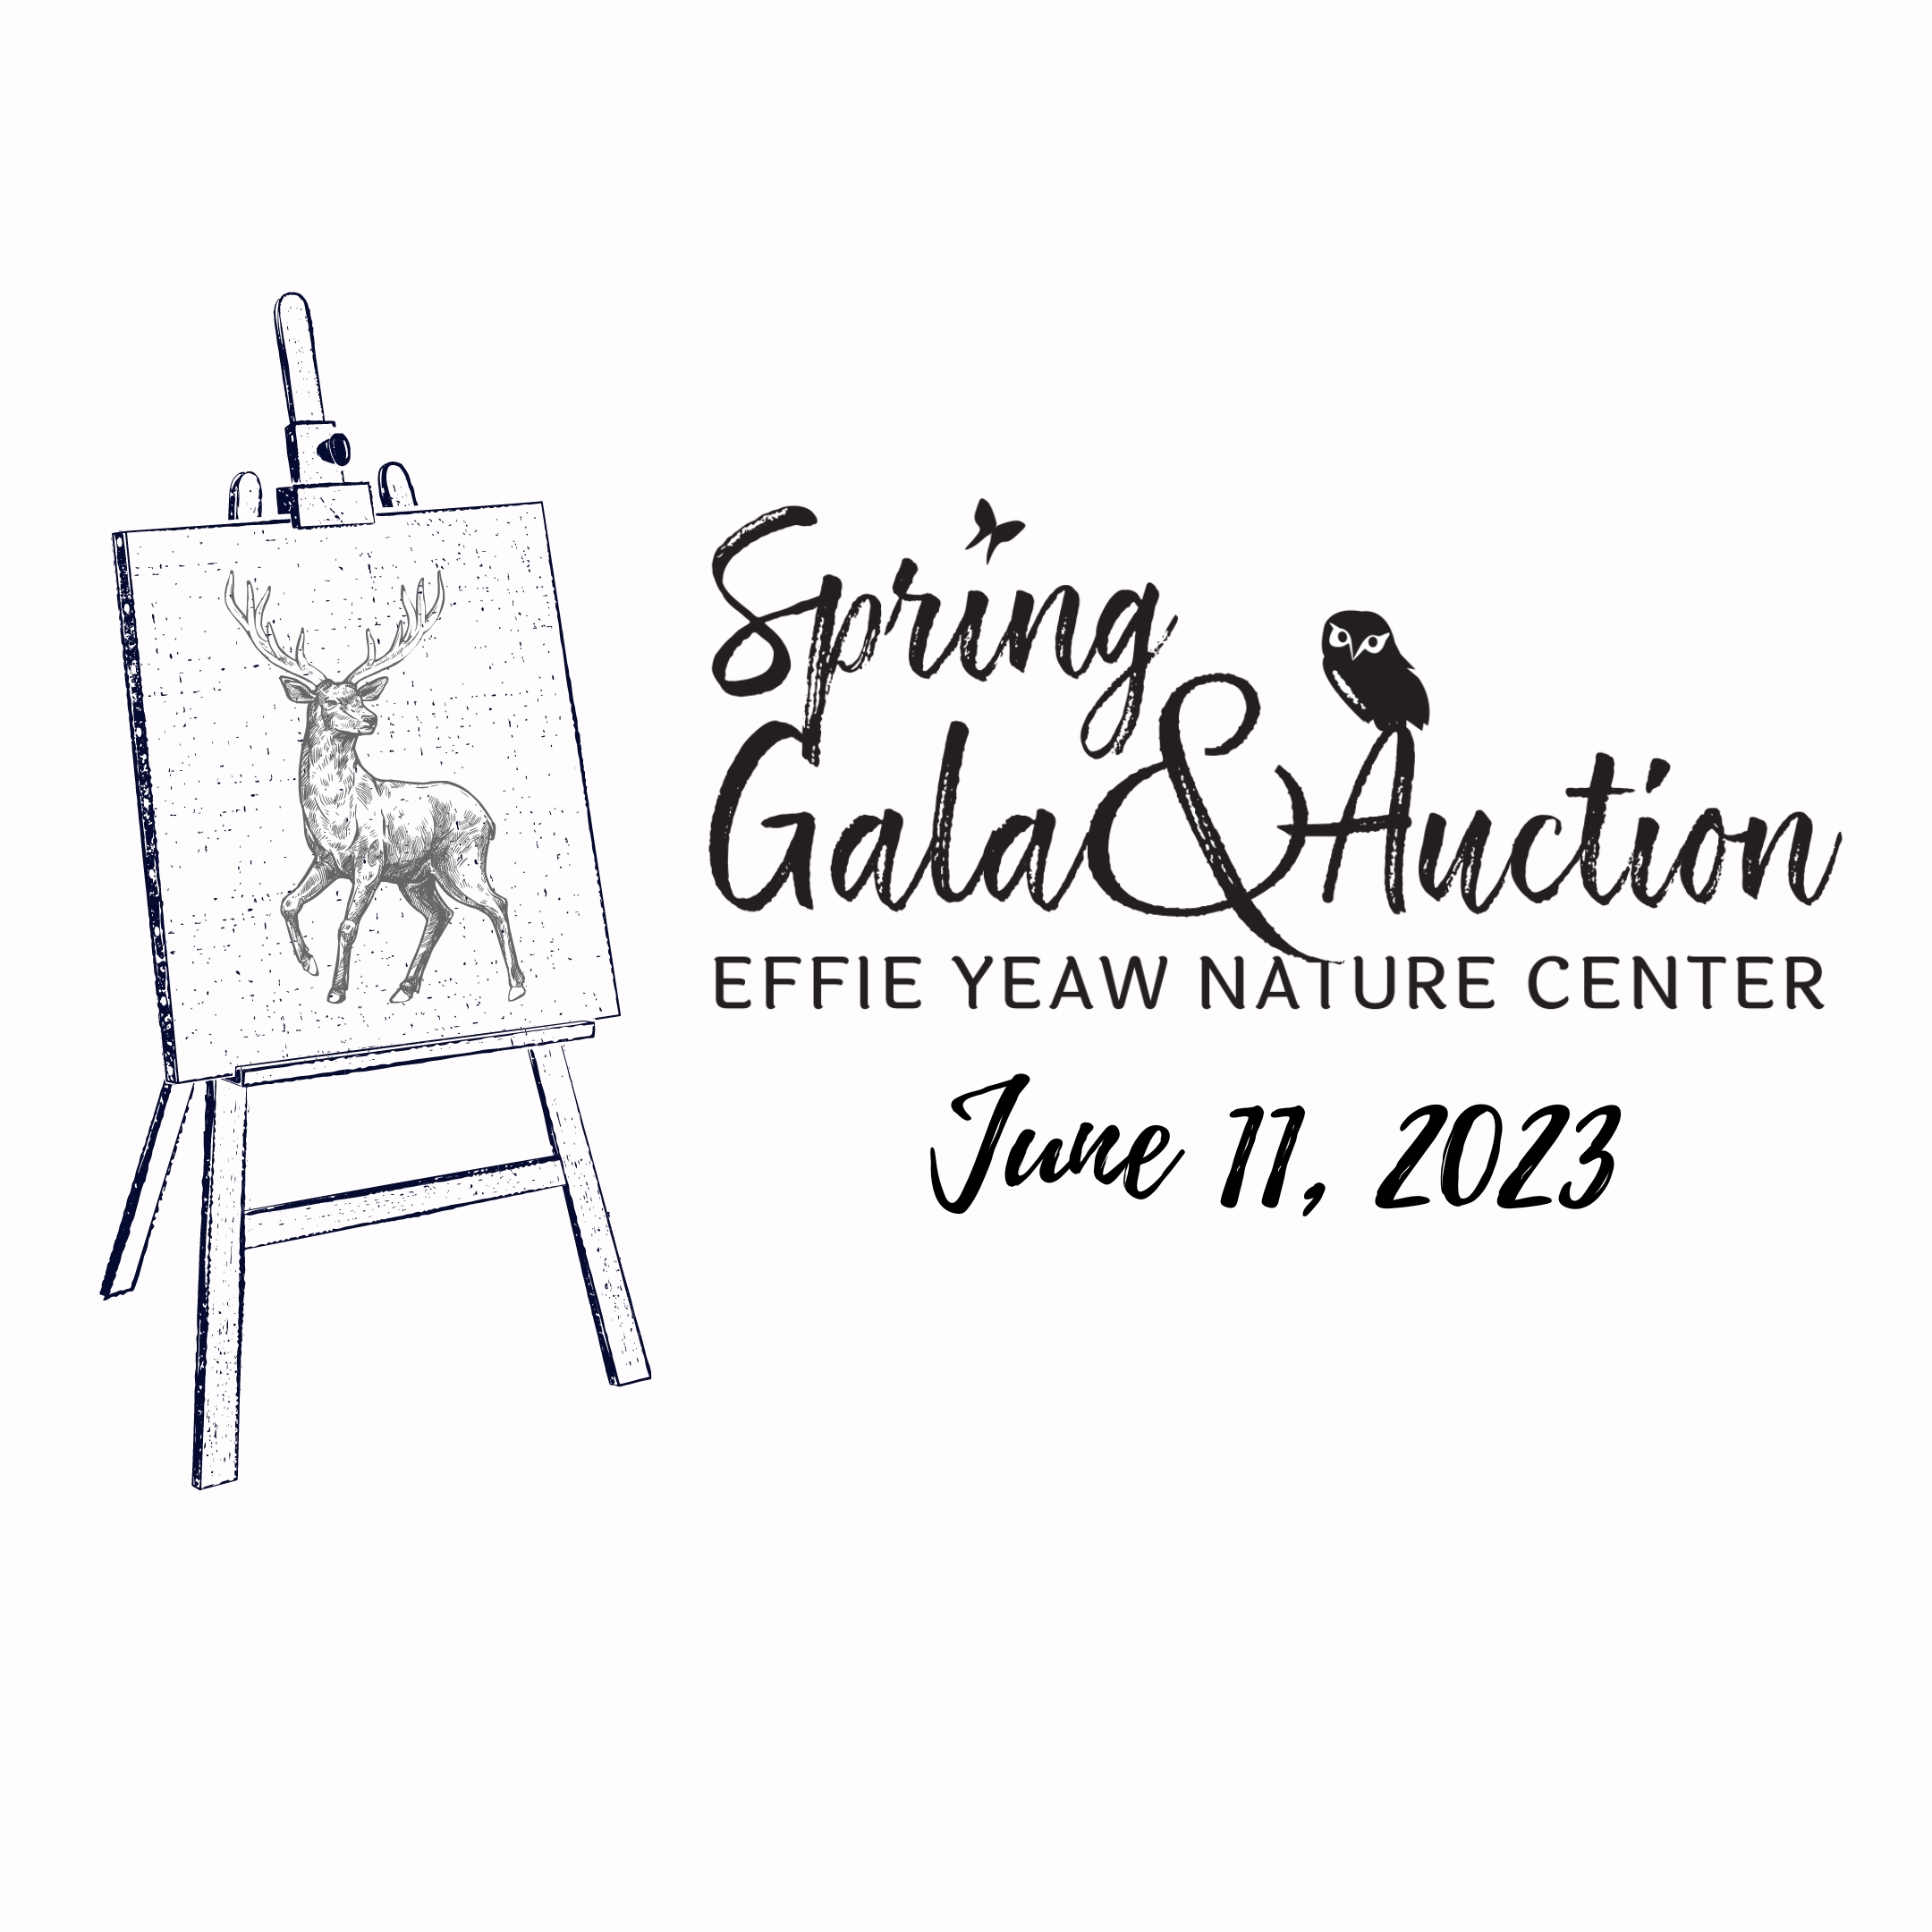 Effie Yeaw Nature Center's spring Gala and Auction on June 5, 2022